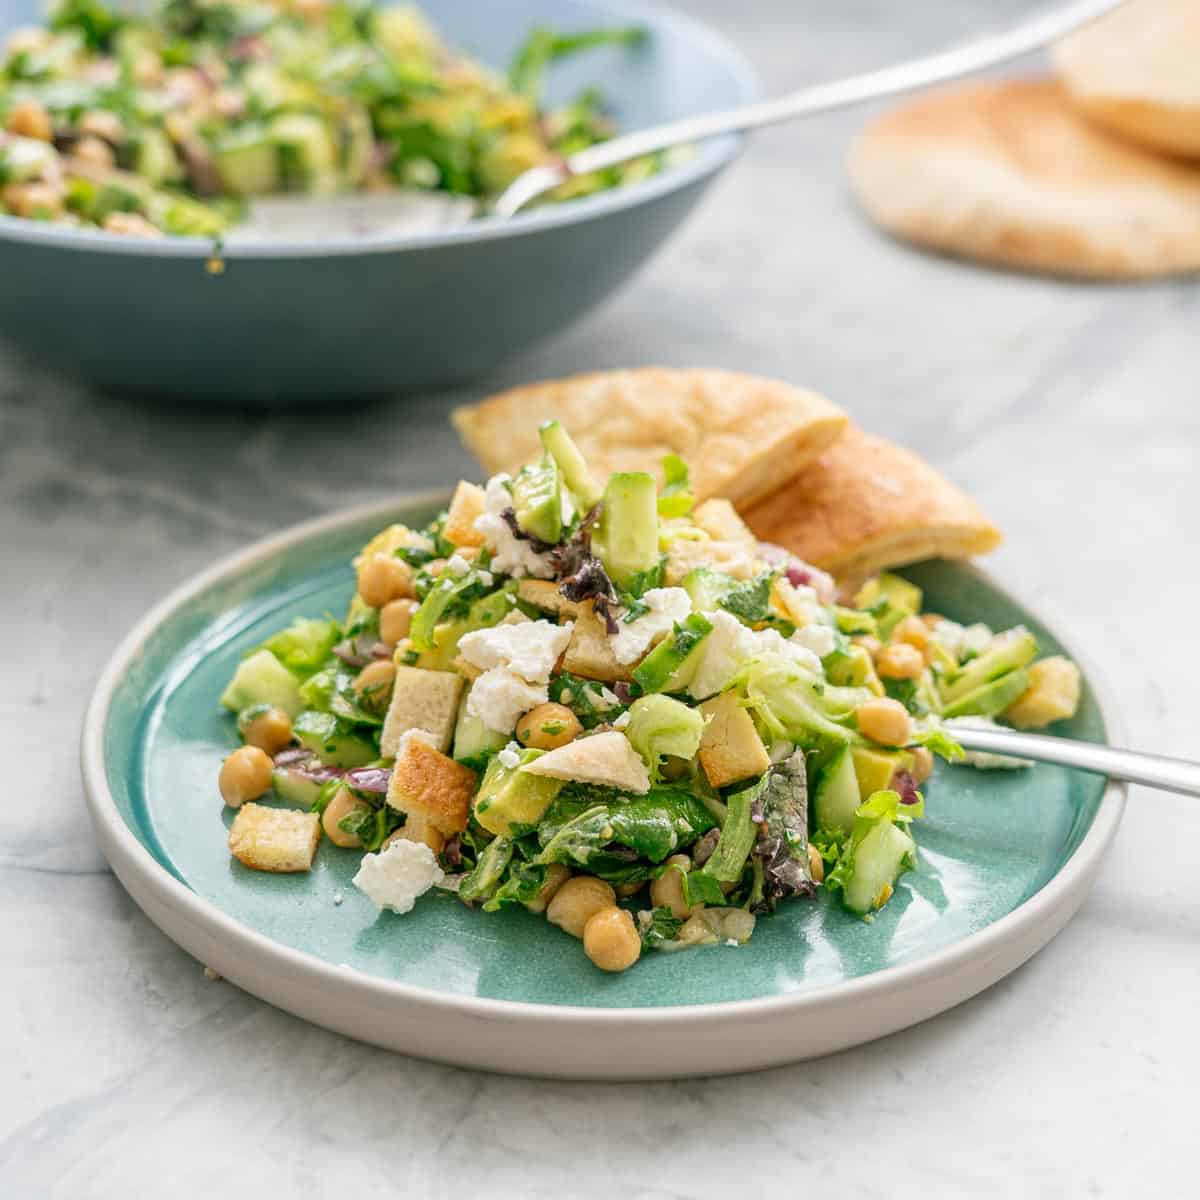 A salad of chickpeas, avocado, feta and green vegetables on a turquoise plate with wedges of pita bread. 